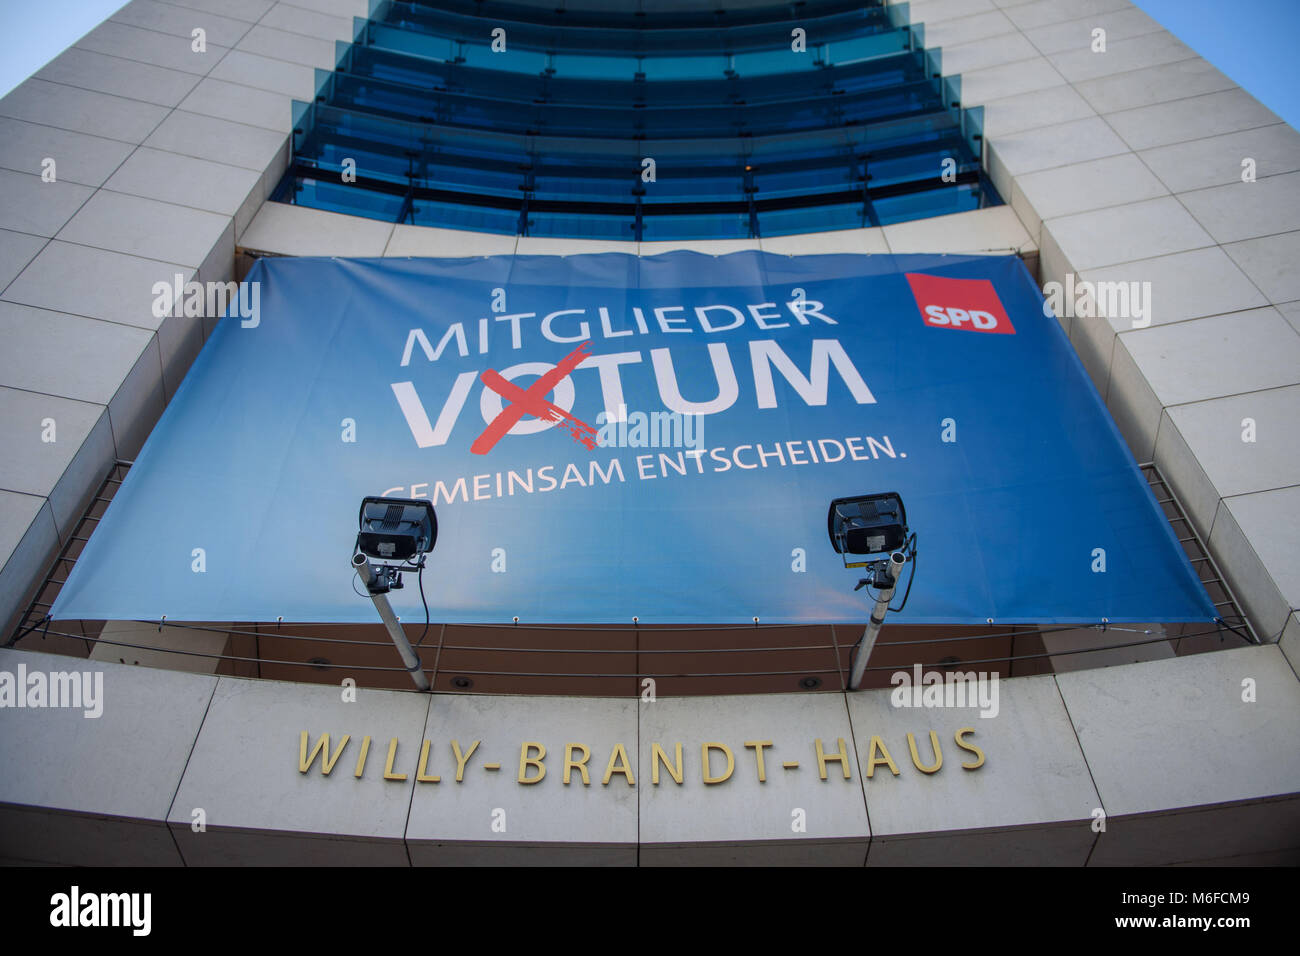 Berlin, Germany. 3rd March 2018.  A large billboard reading 'Mitgliedervotum - gemeinsam entscheiden' (lit. 'Member's vote - deciding together') is placed on the facade of the Willy-Brandt-Haus, the SPD's party headquarters. Photo: Gregor Fischer/dpa Credit: dpa picture alliance/Alamy Live News Credit: dpa picture alliance/Alamy Live News Stock Photo